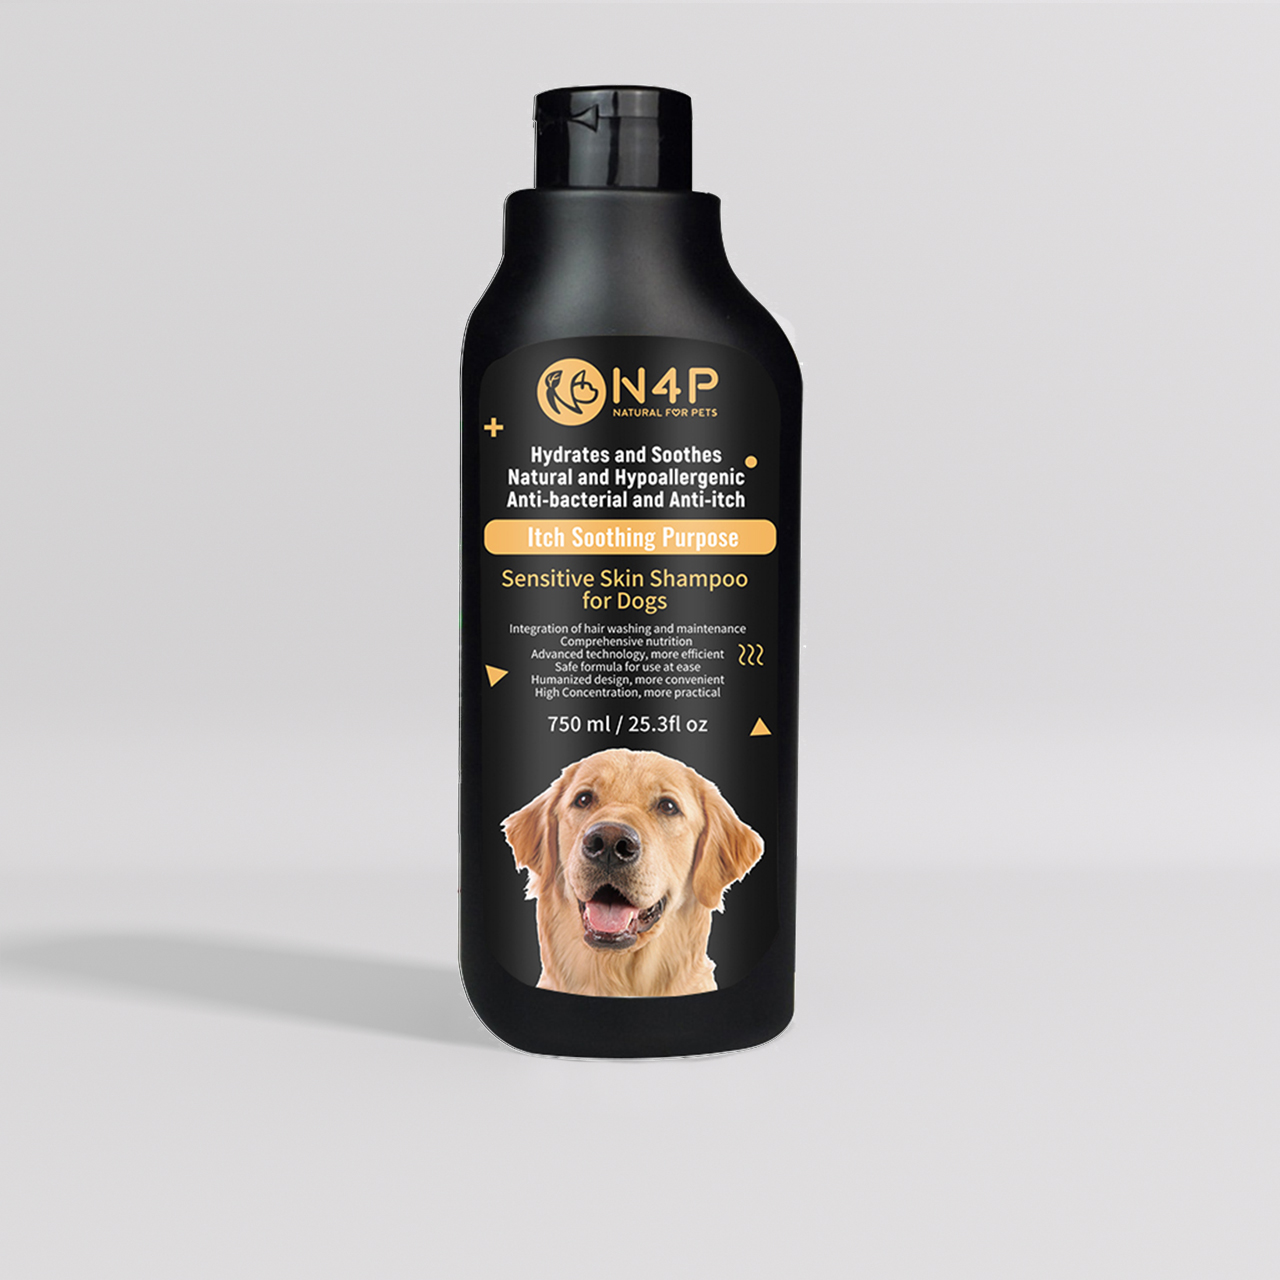 Pets Shampoo Itch Soothing Purpose 750ml for Dogs